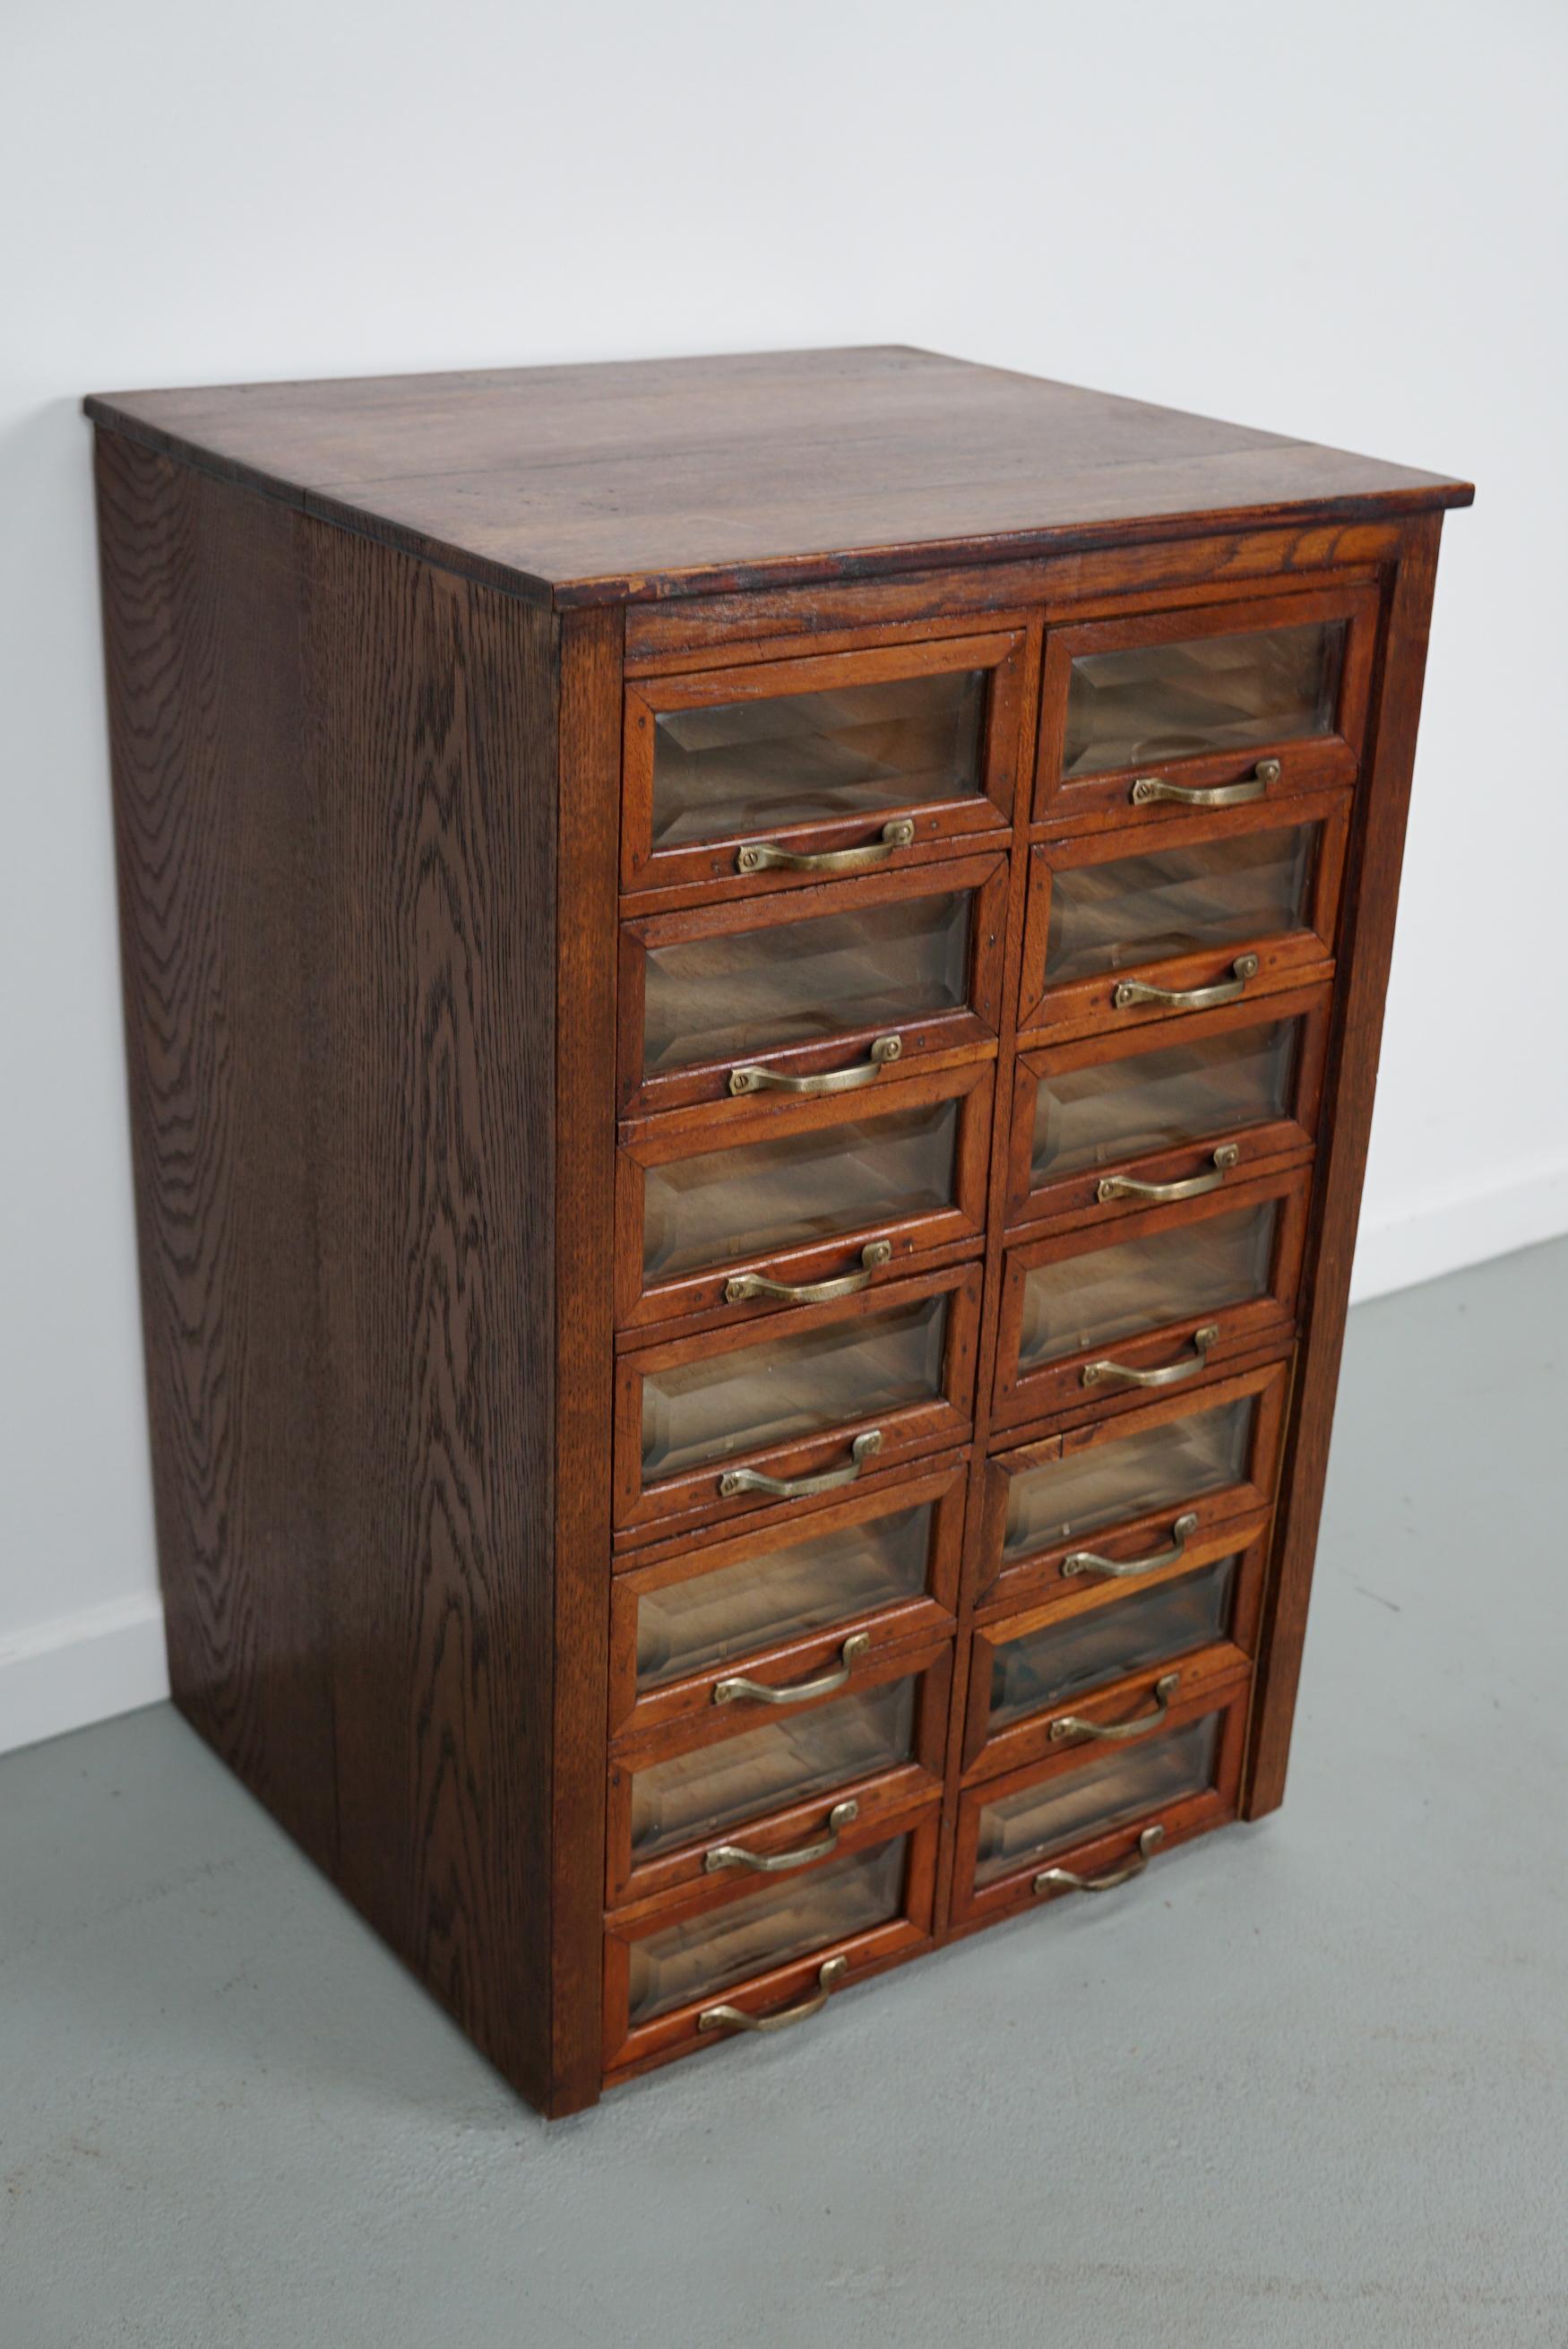 This haberdashery cabinet was produced during the 1930s in the Netherlands. It features 14 drawers in oak with cut glass fronts and metal handles. It was originally used in the department store Maussen in the city of Maastricht which was closed in